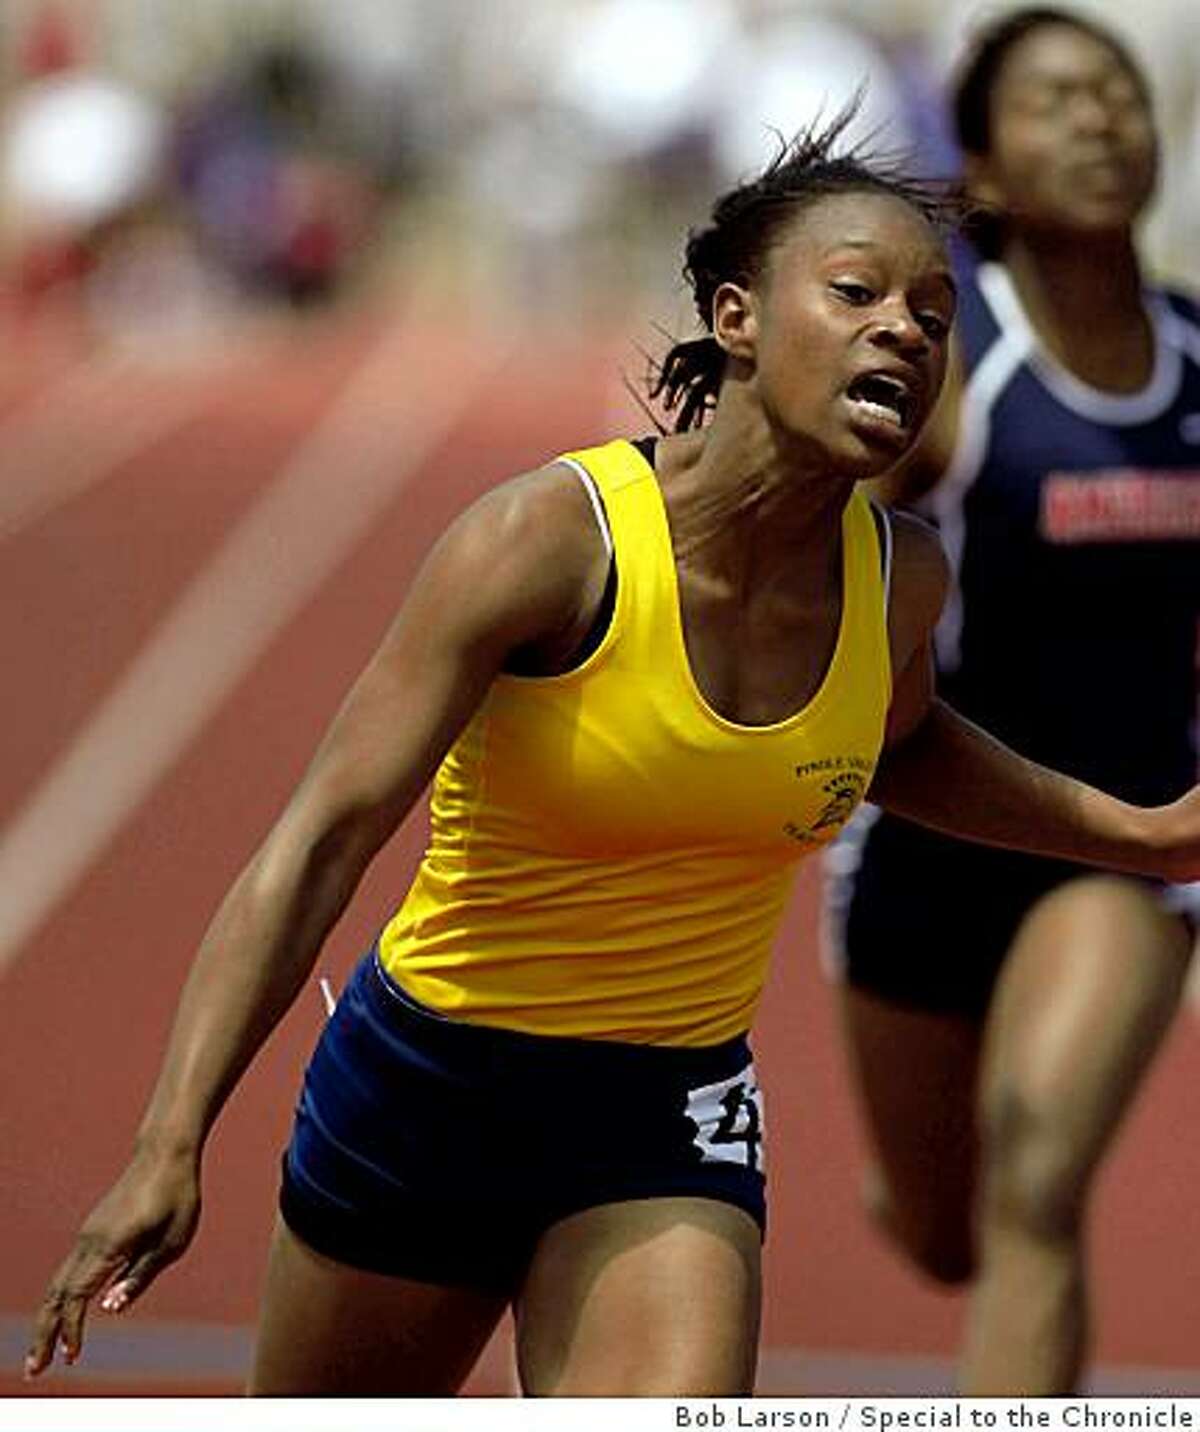 Pinole Valley Strangenae Campbell during the girls 100 meter dash at the North Coast Section, Track and Field Championship in Castro Valley, Ca., Saturday, May 23, 2009. (Special to the Chronicle / Bob Larson)